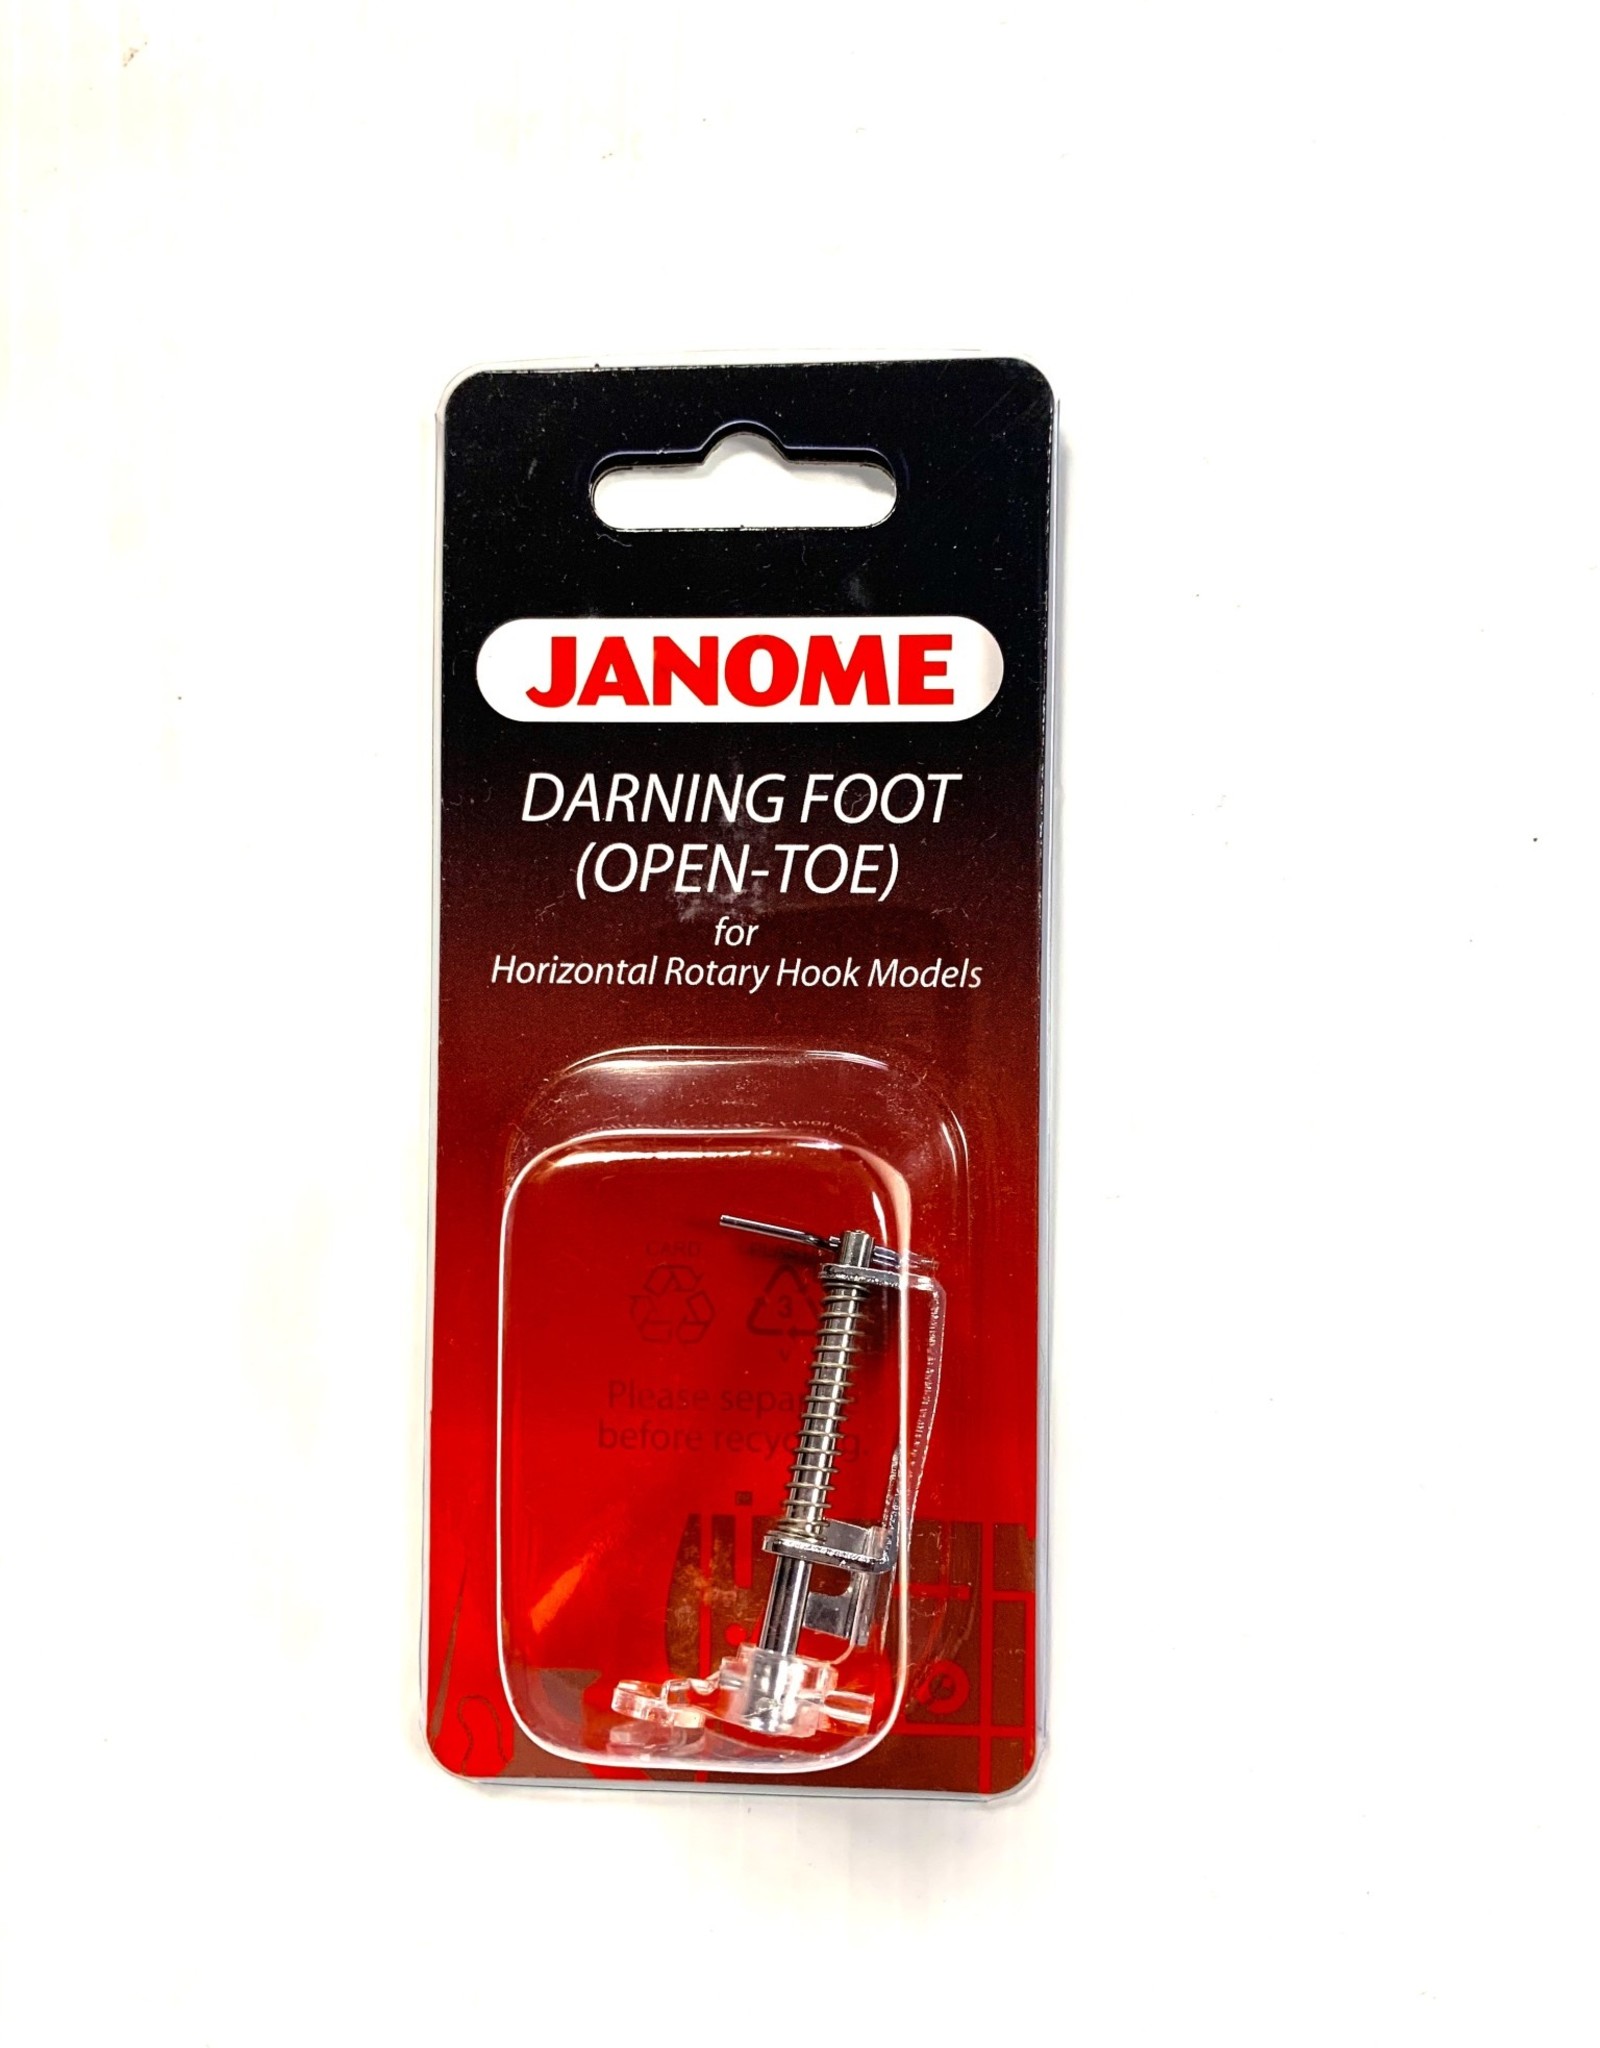 Janome darning foot (open toe) for horizontal - 200340001